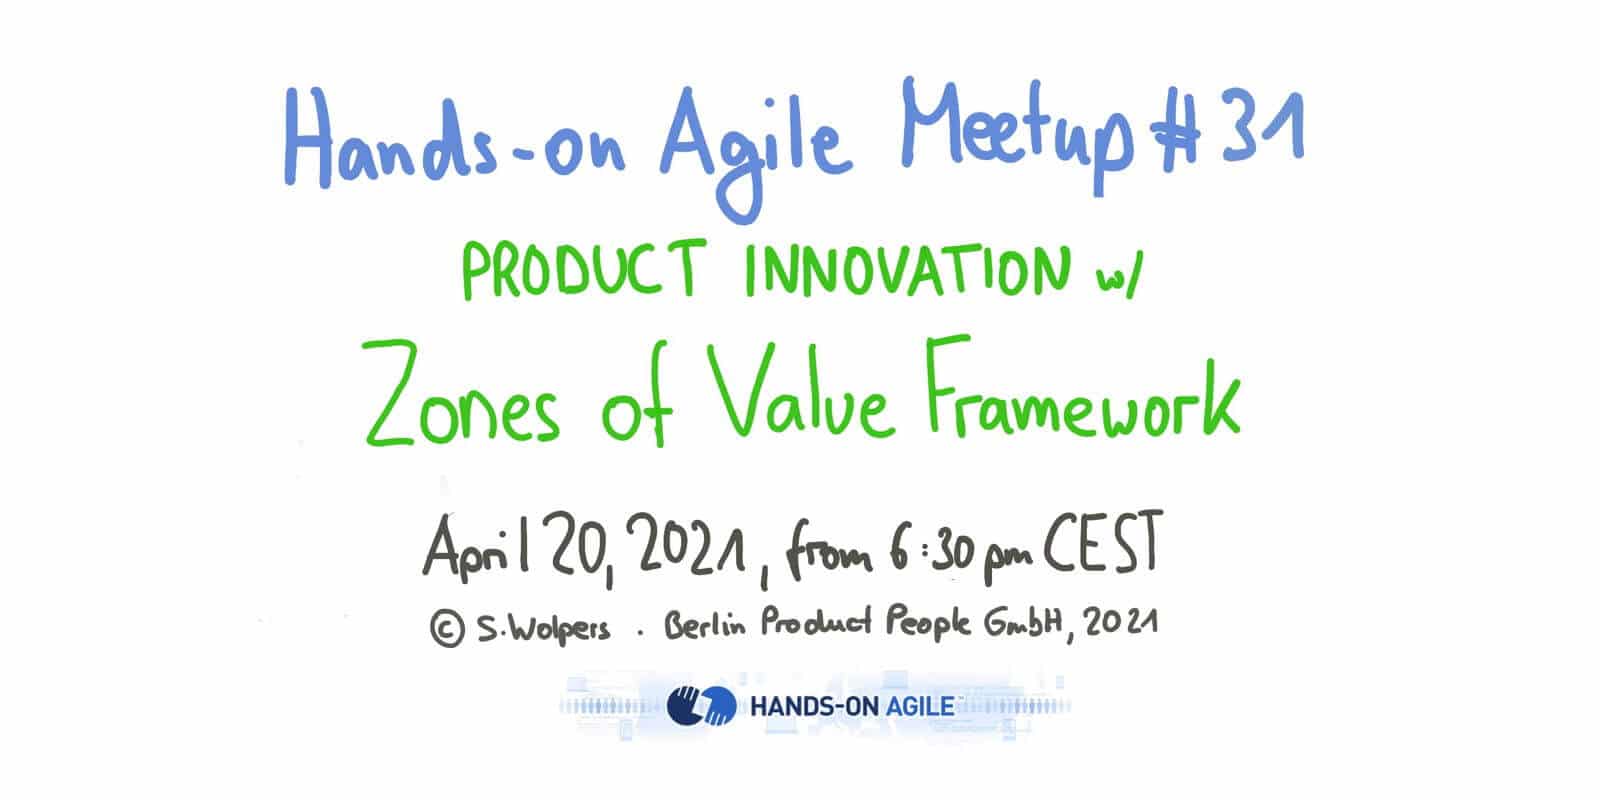 Hands-on Agile #31, April 20, 2021: Drive Product Innovation with the Zones of Value Framework — Berlin Product People GmbH